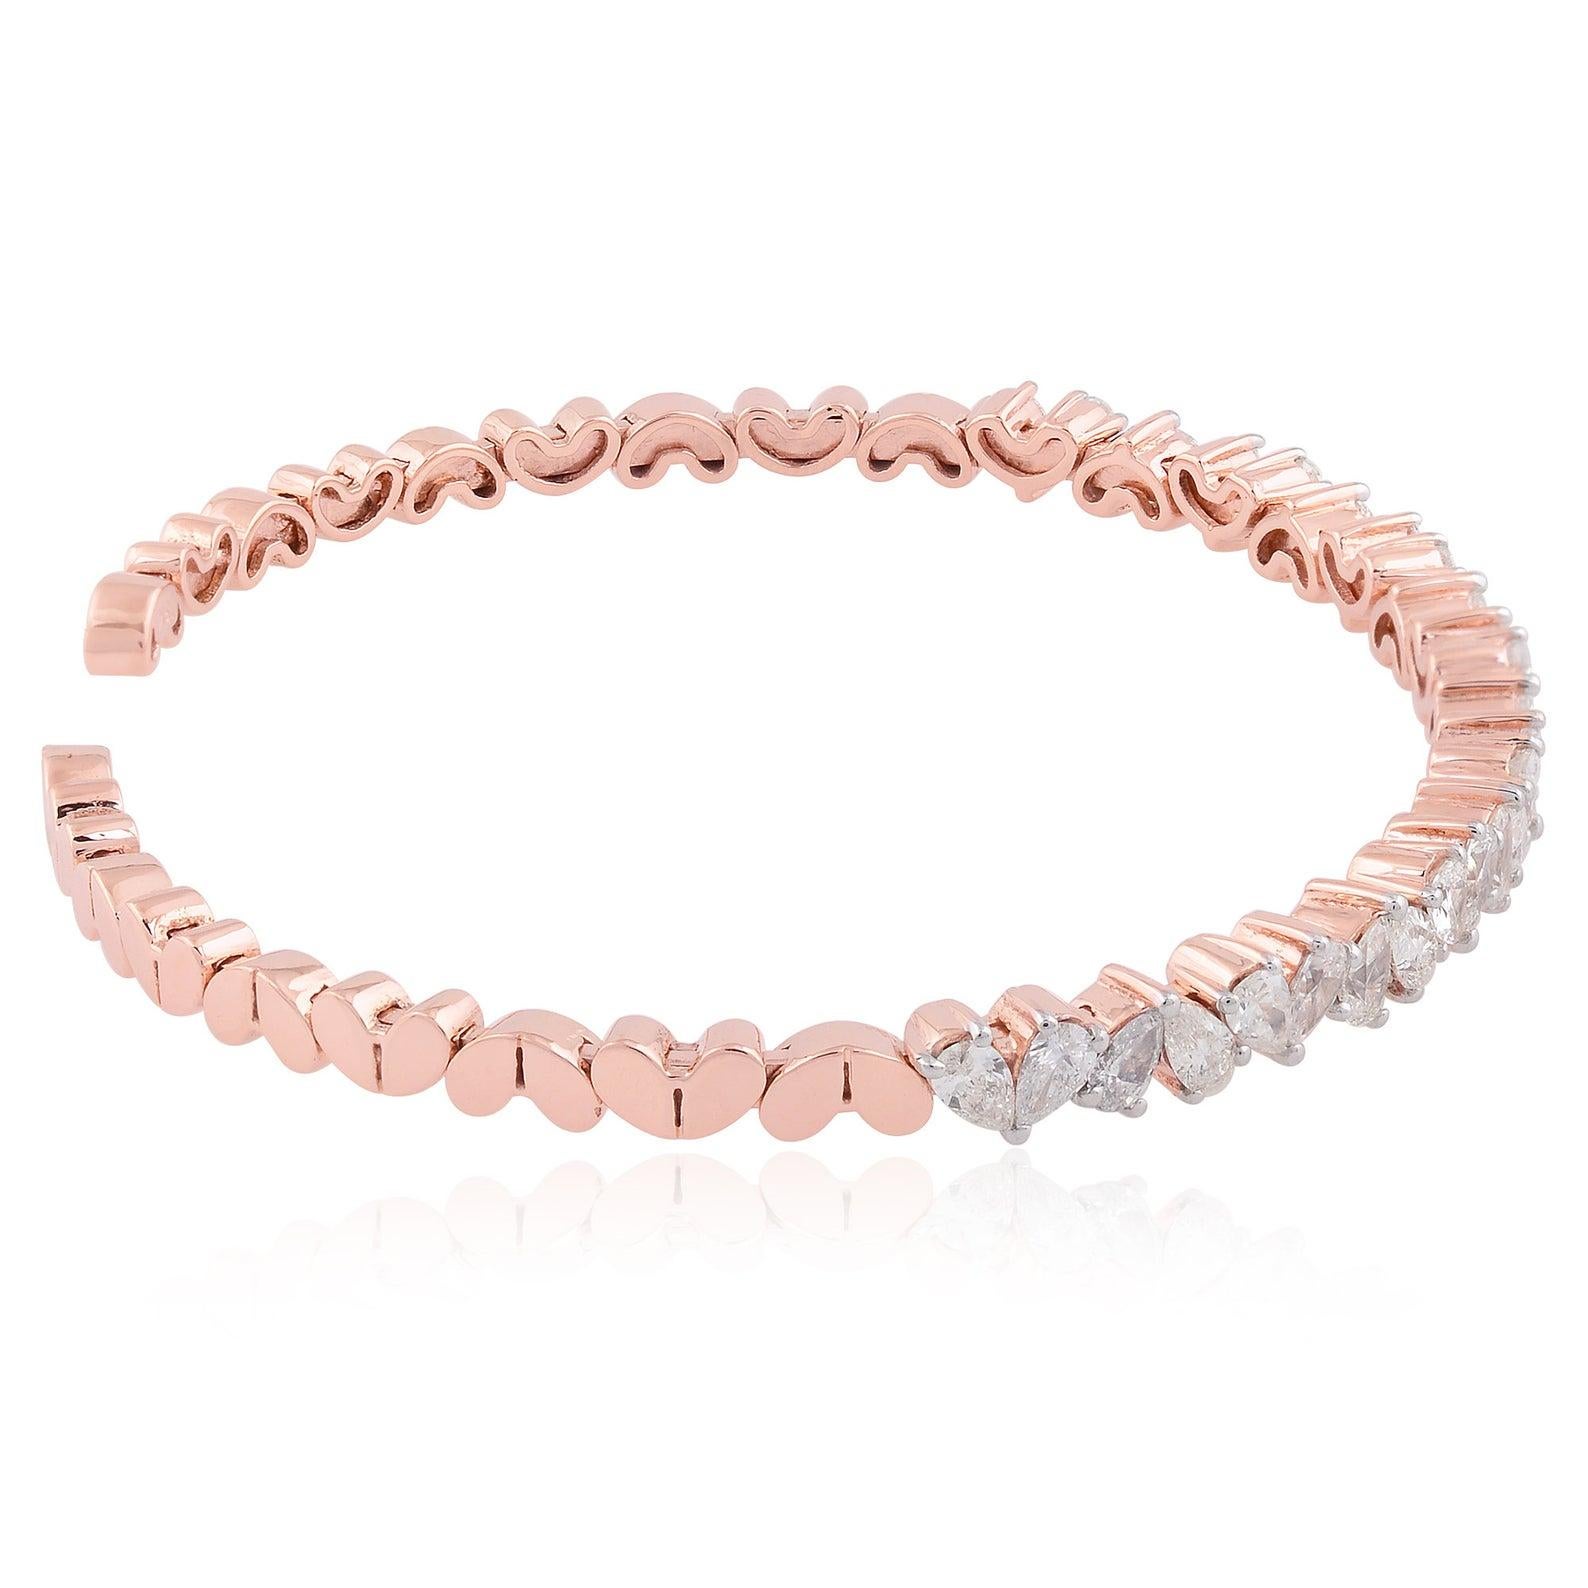 Cast from 14-karat rose gold, this bracelet is hand set with 2.45 carats of sparkling diamonds. Available in yellow, rose and white gold. 

FOLLOW MEGHNA JEWELS storefront to view the latest collection & exclusive pieces. Meghna Jewels is proudly